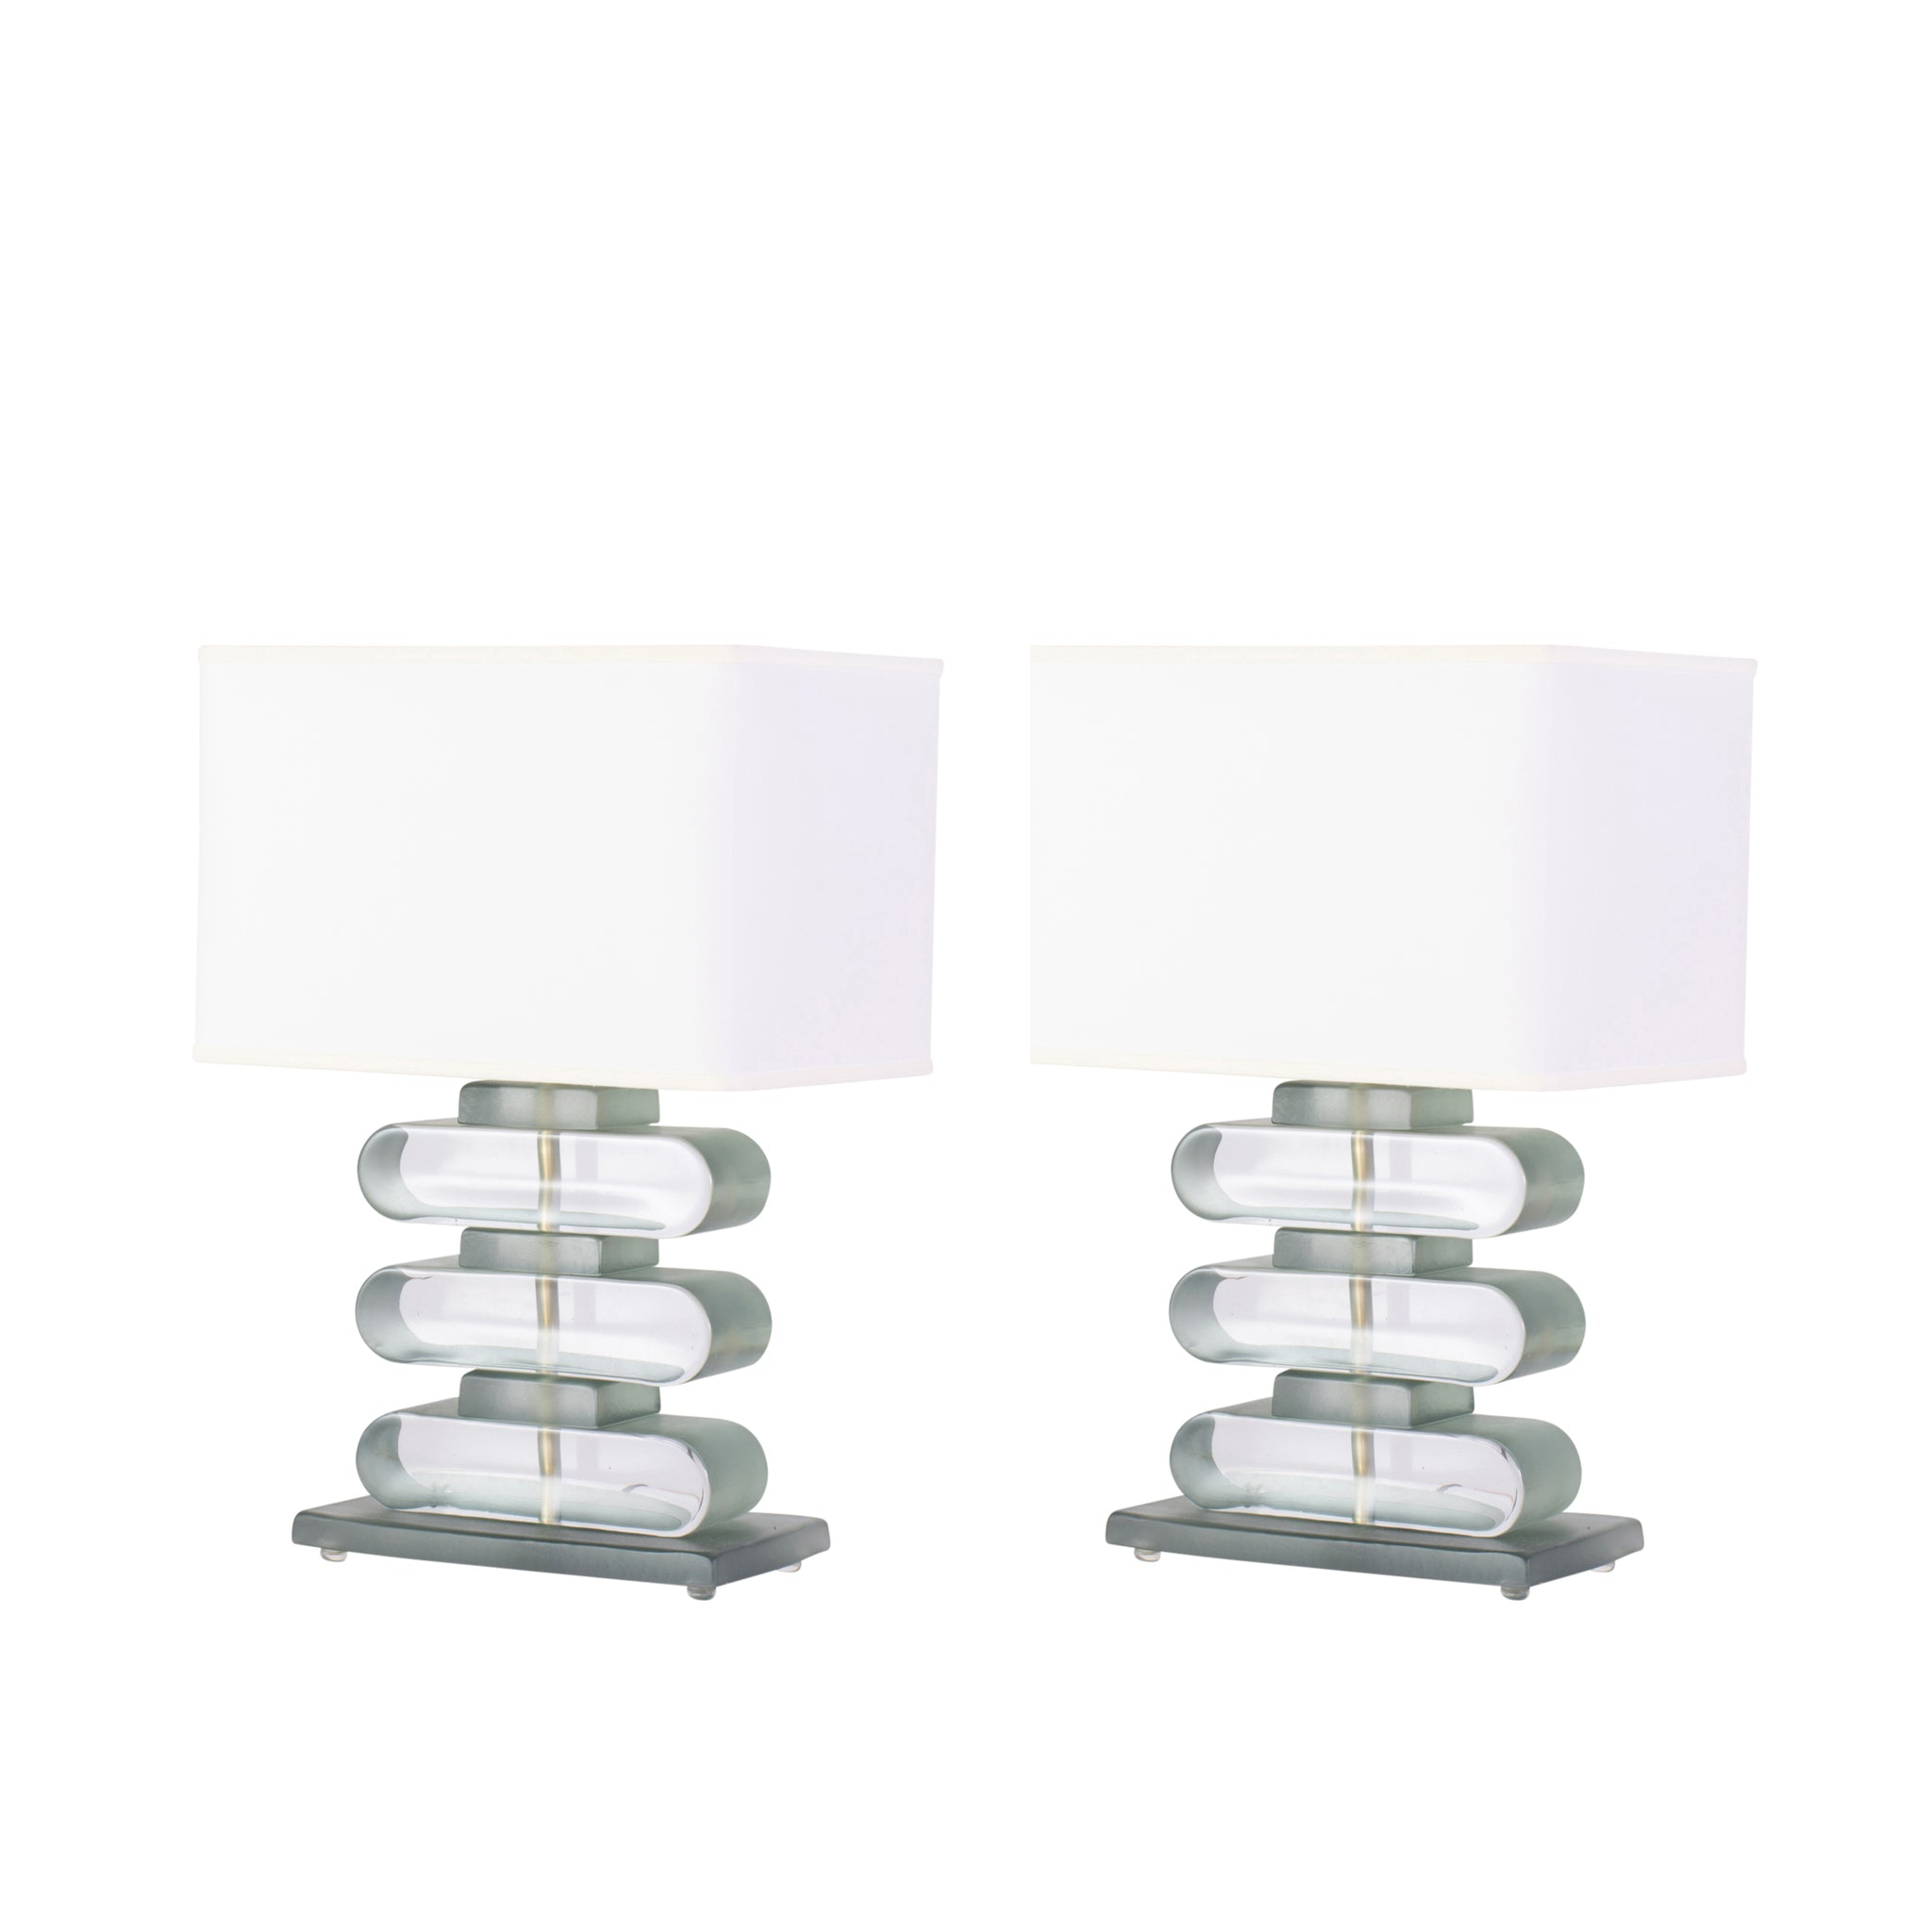 Pair of Nickel and Smoked Aqua Murano Glass Architectural Table Lamps